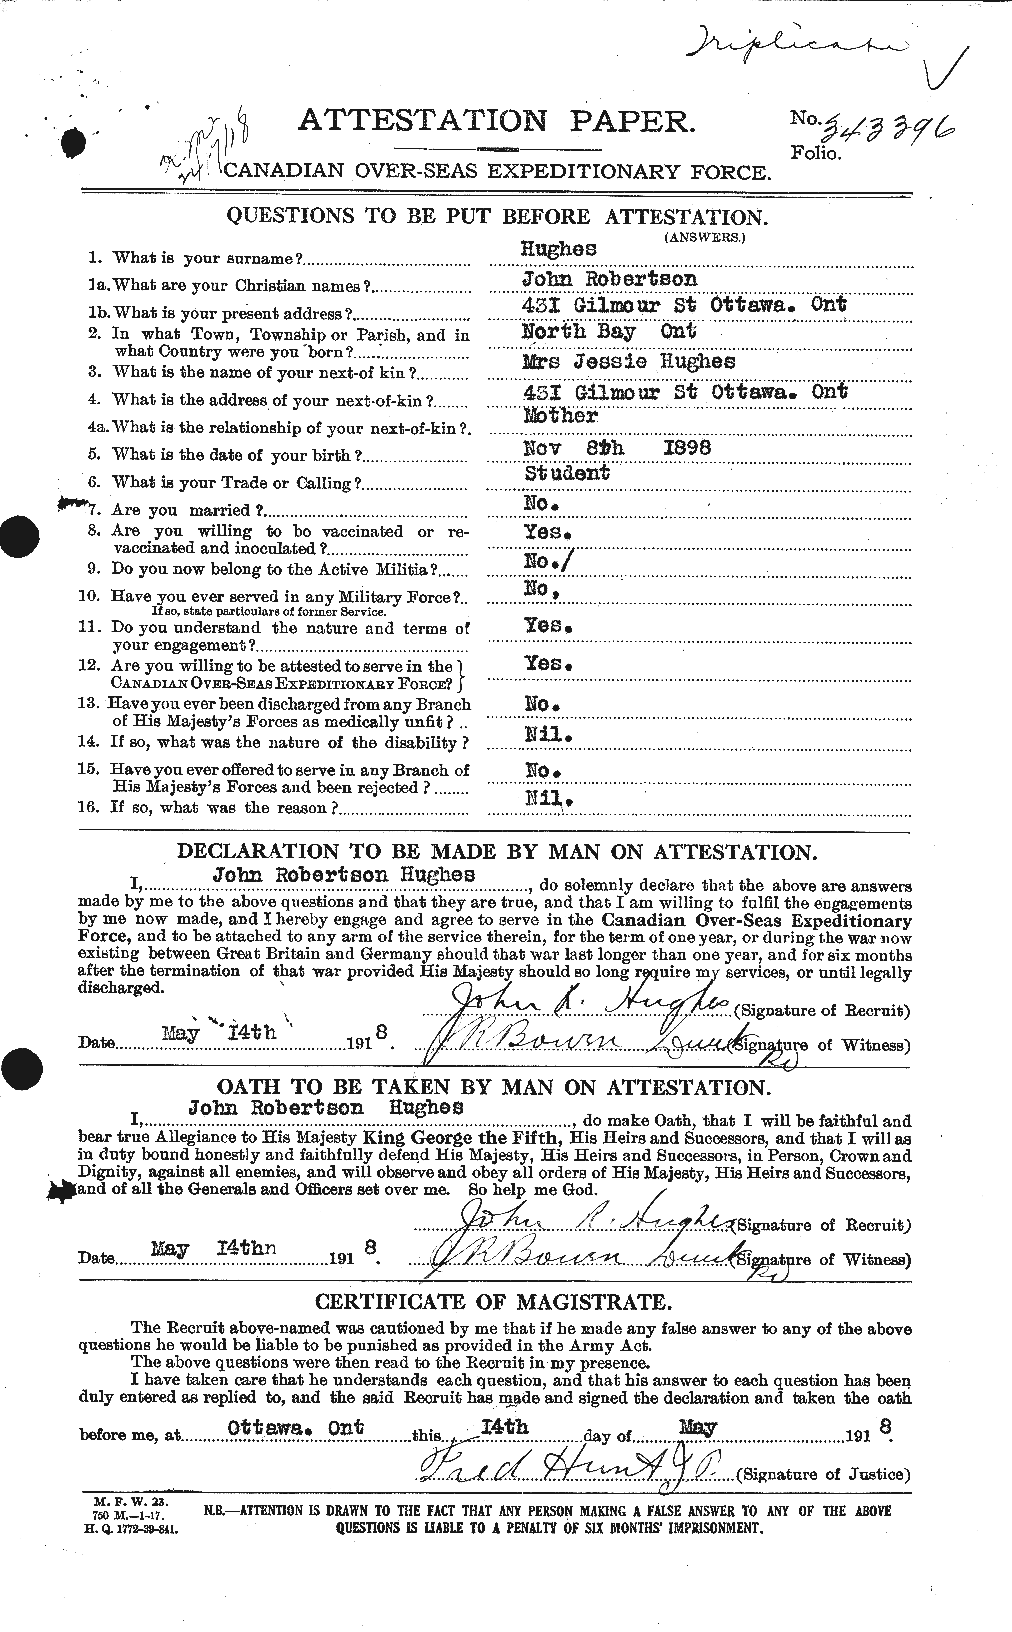 Personnel Records of the First World War - CEF 404047a